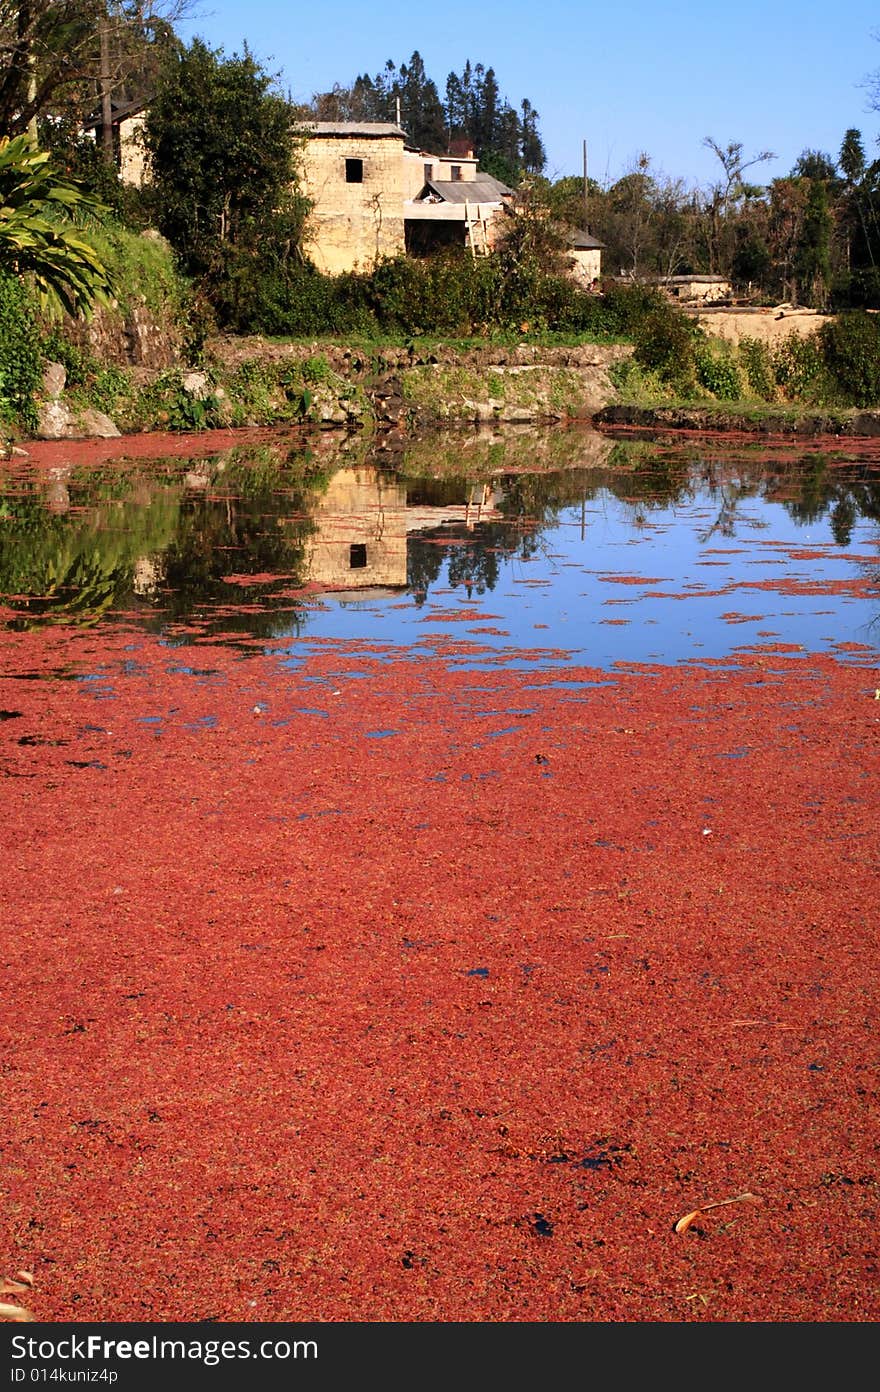 The photography place is the Chinese Yunnan Province Yuanyang County, there rural scenery is beautiful, in the field grows has the red duckweed.